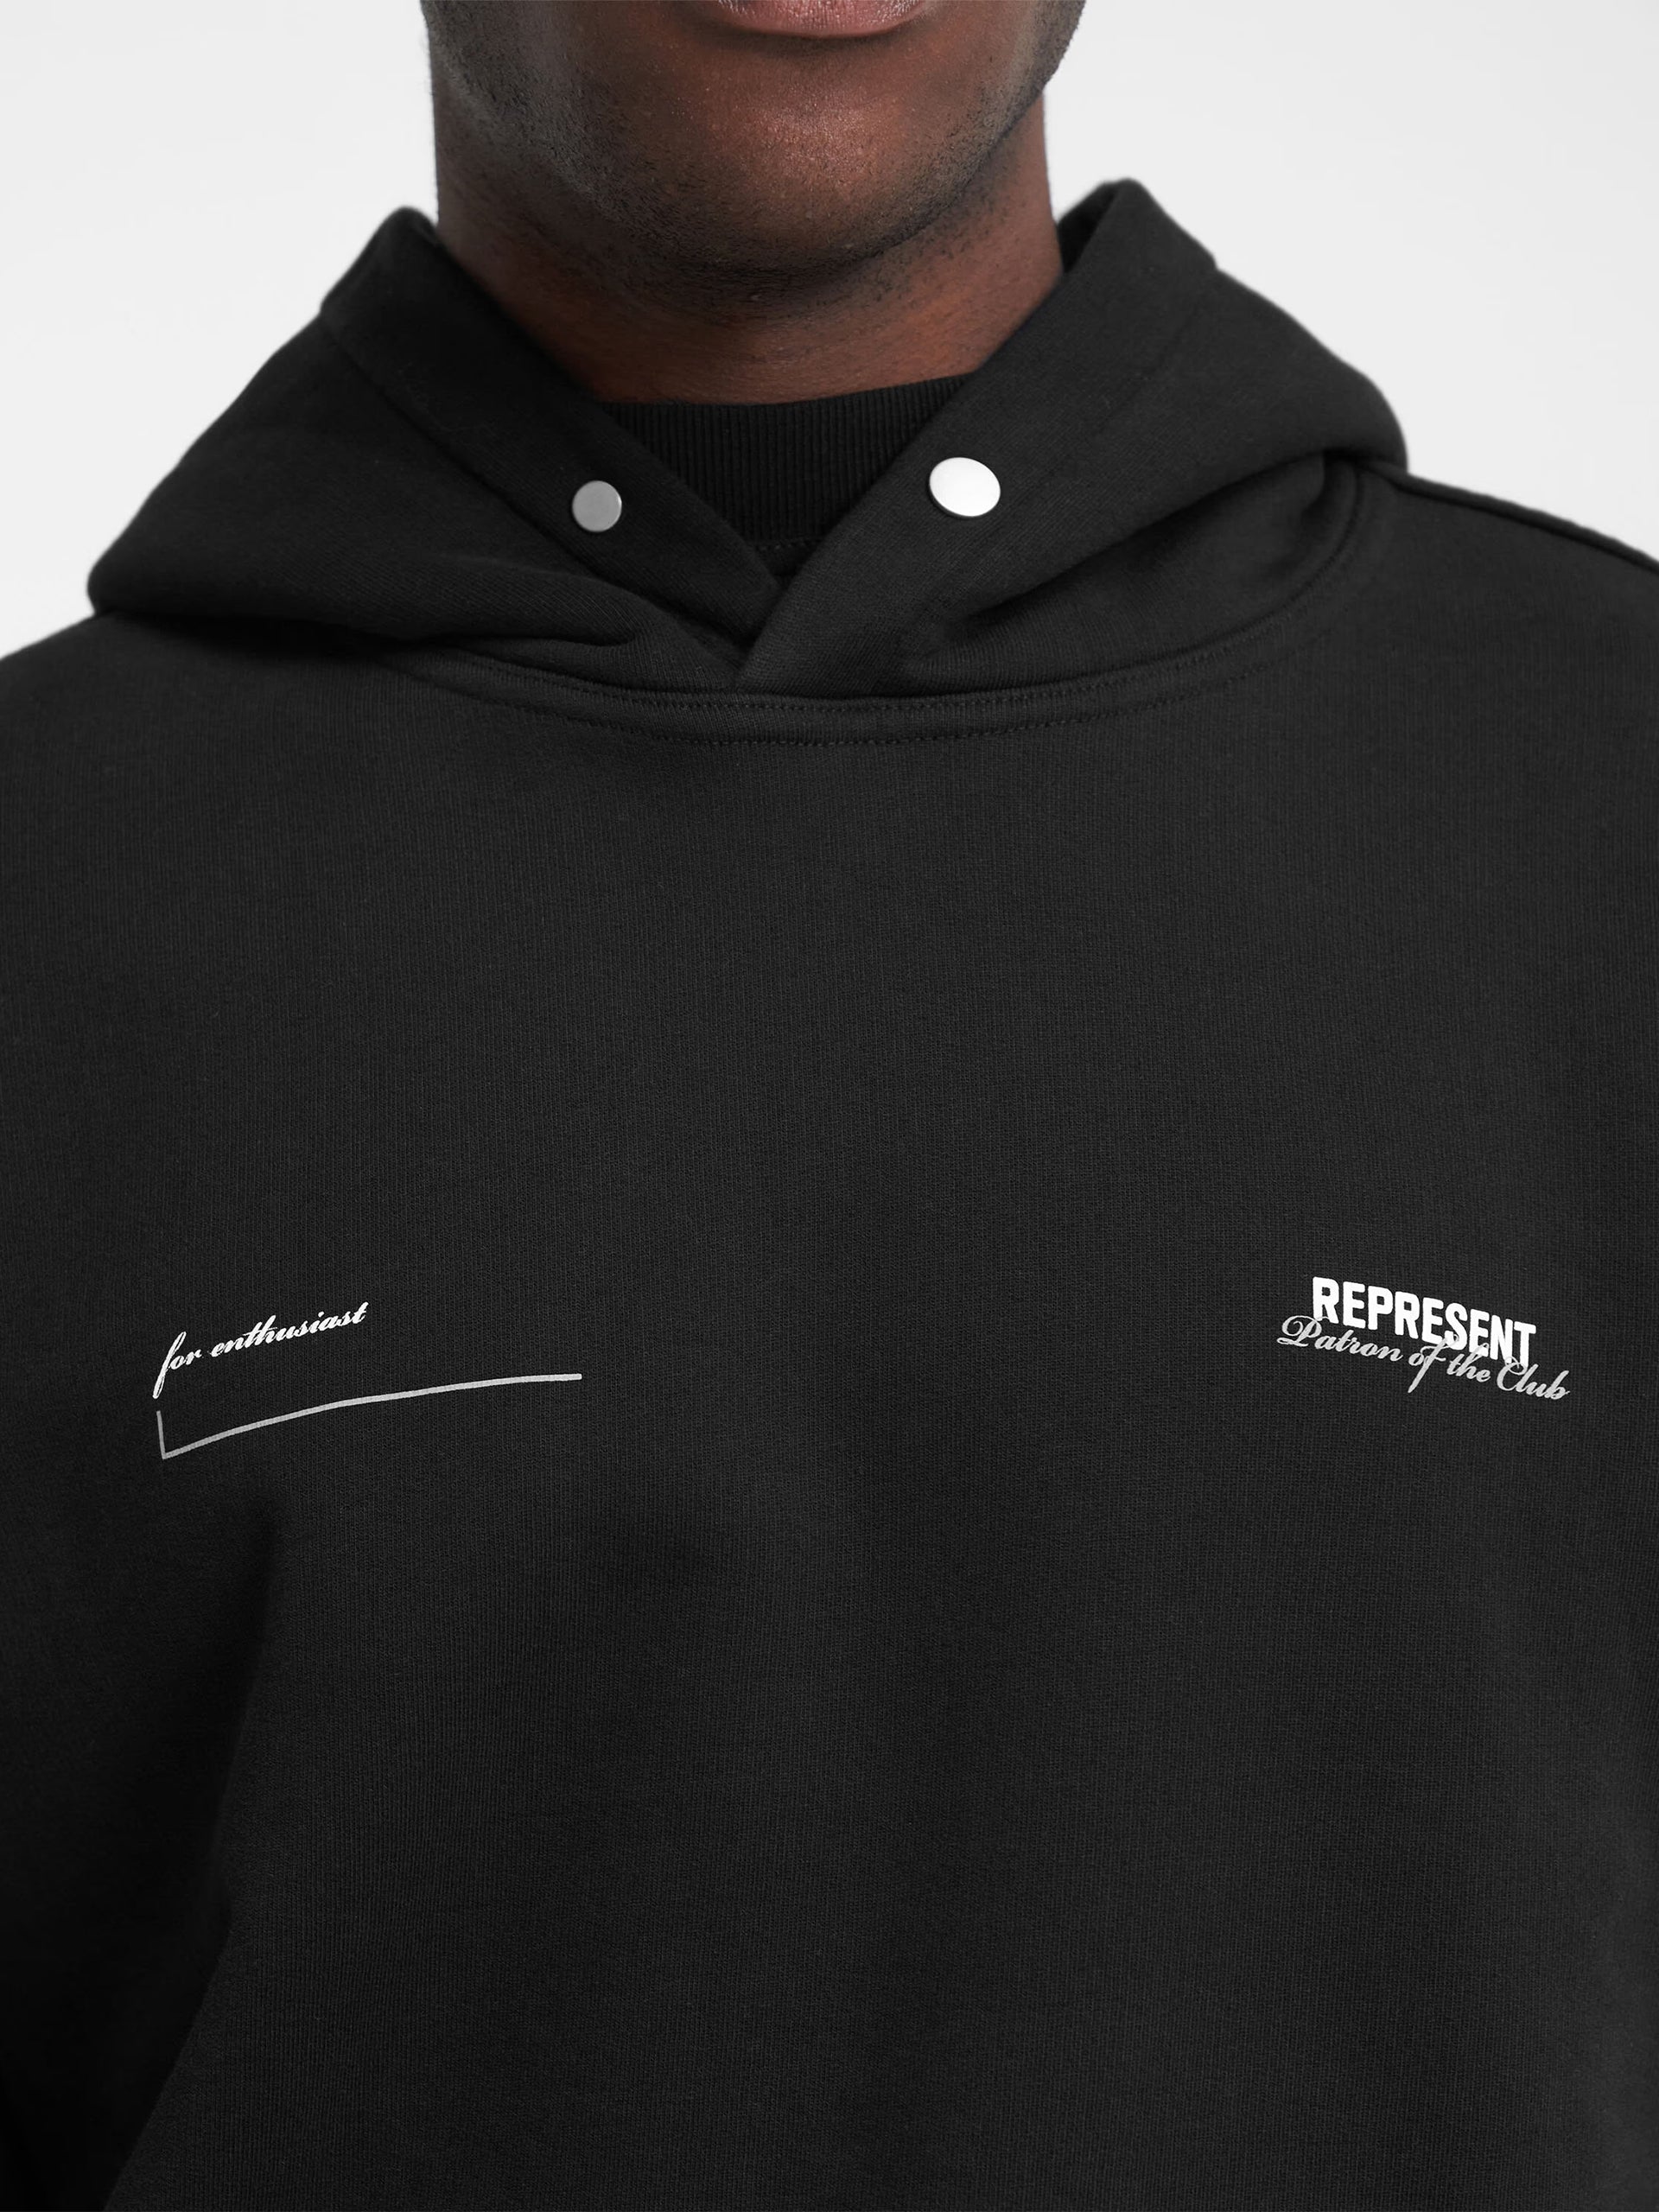 REPRESENT - Patron Of The Club Hoodie